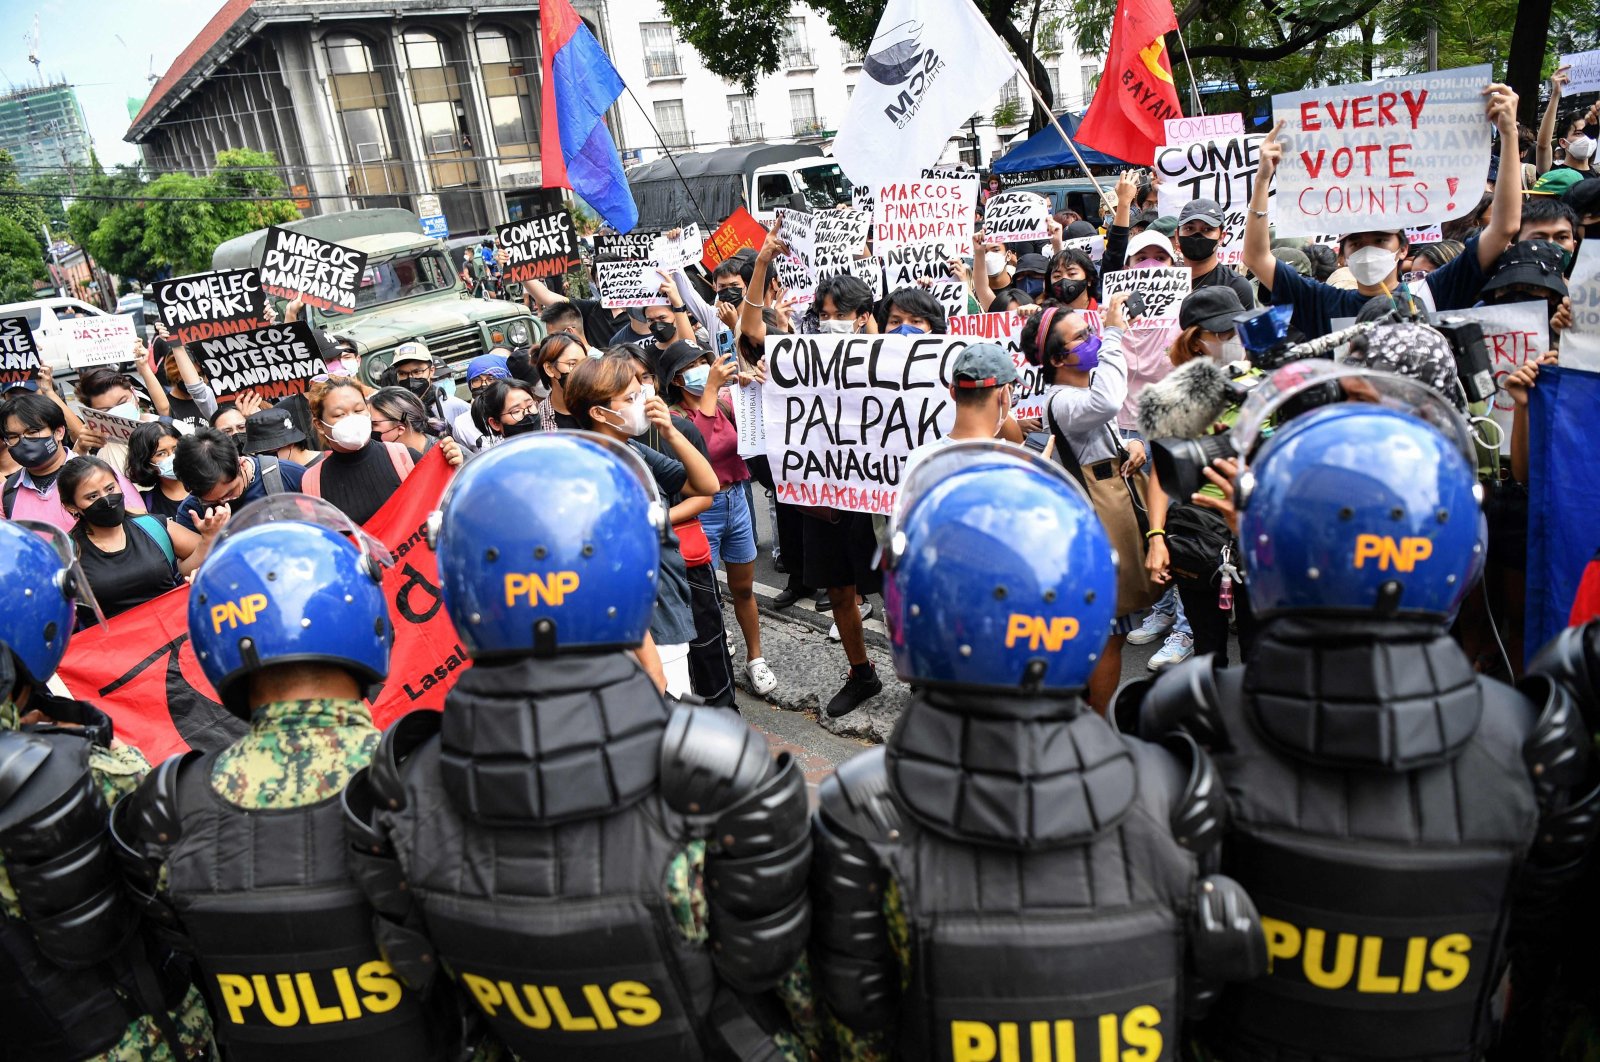 People display placards during a rally in front of the commission on elections to protest against the results of the presidential election, Manila, the Philippines, May 10, 2022. (AFP Photo)